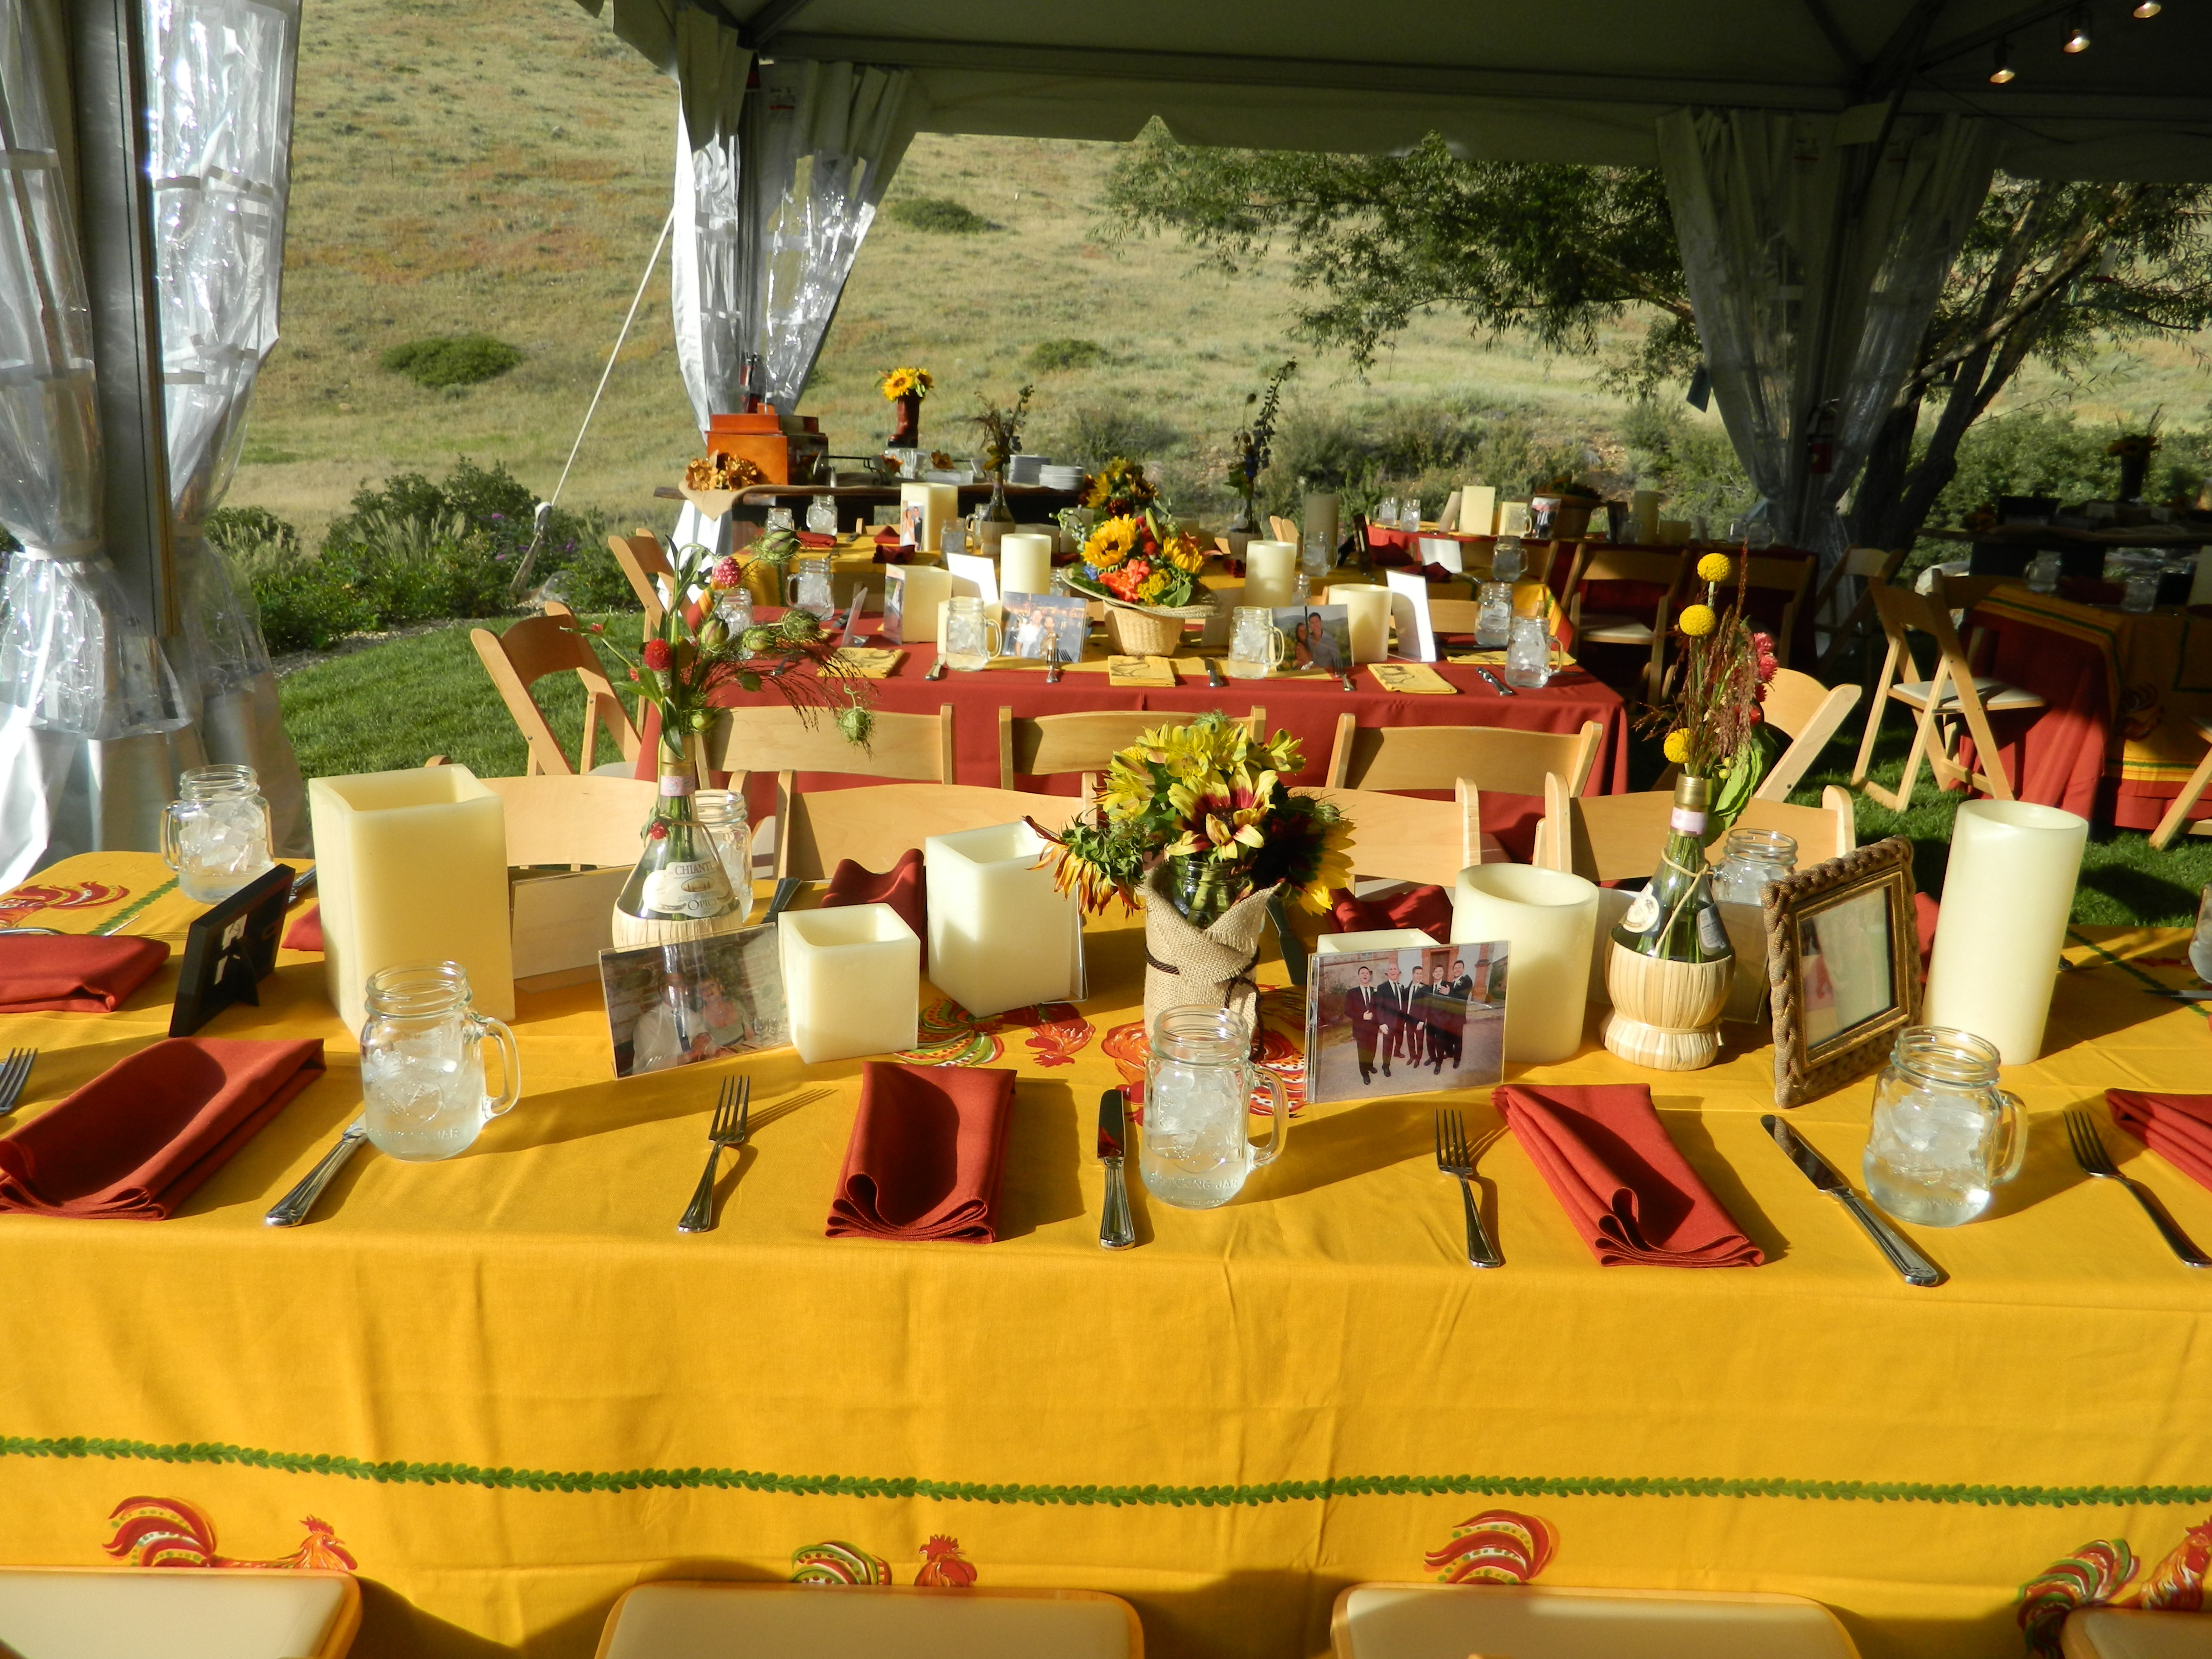 Themed Dinner Party Ideas For Adults
 western party theme ideas adults